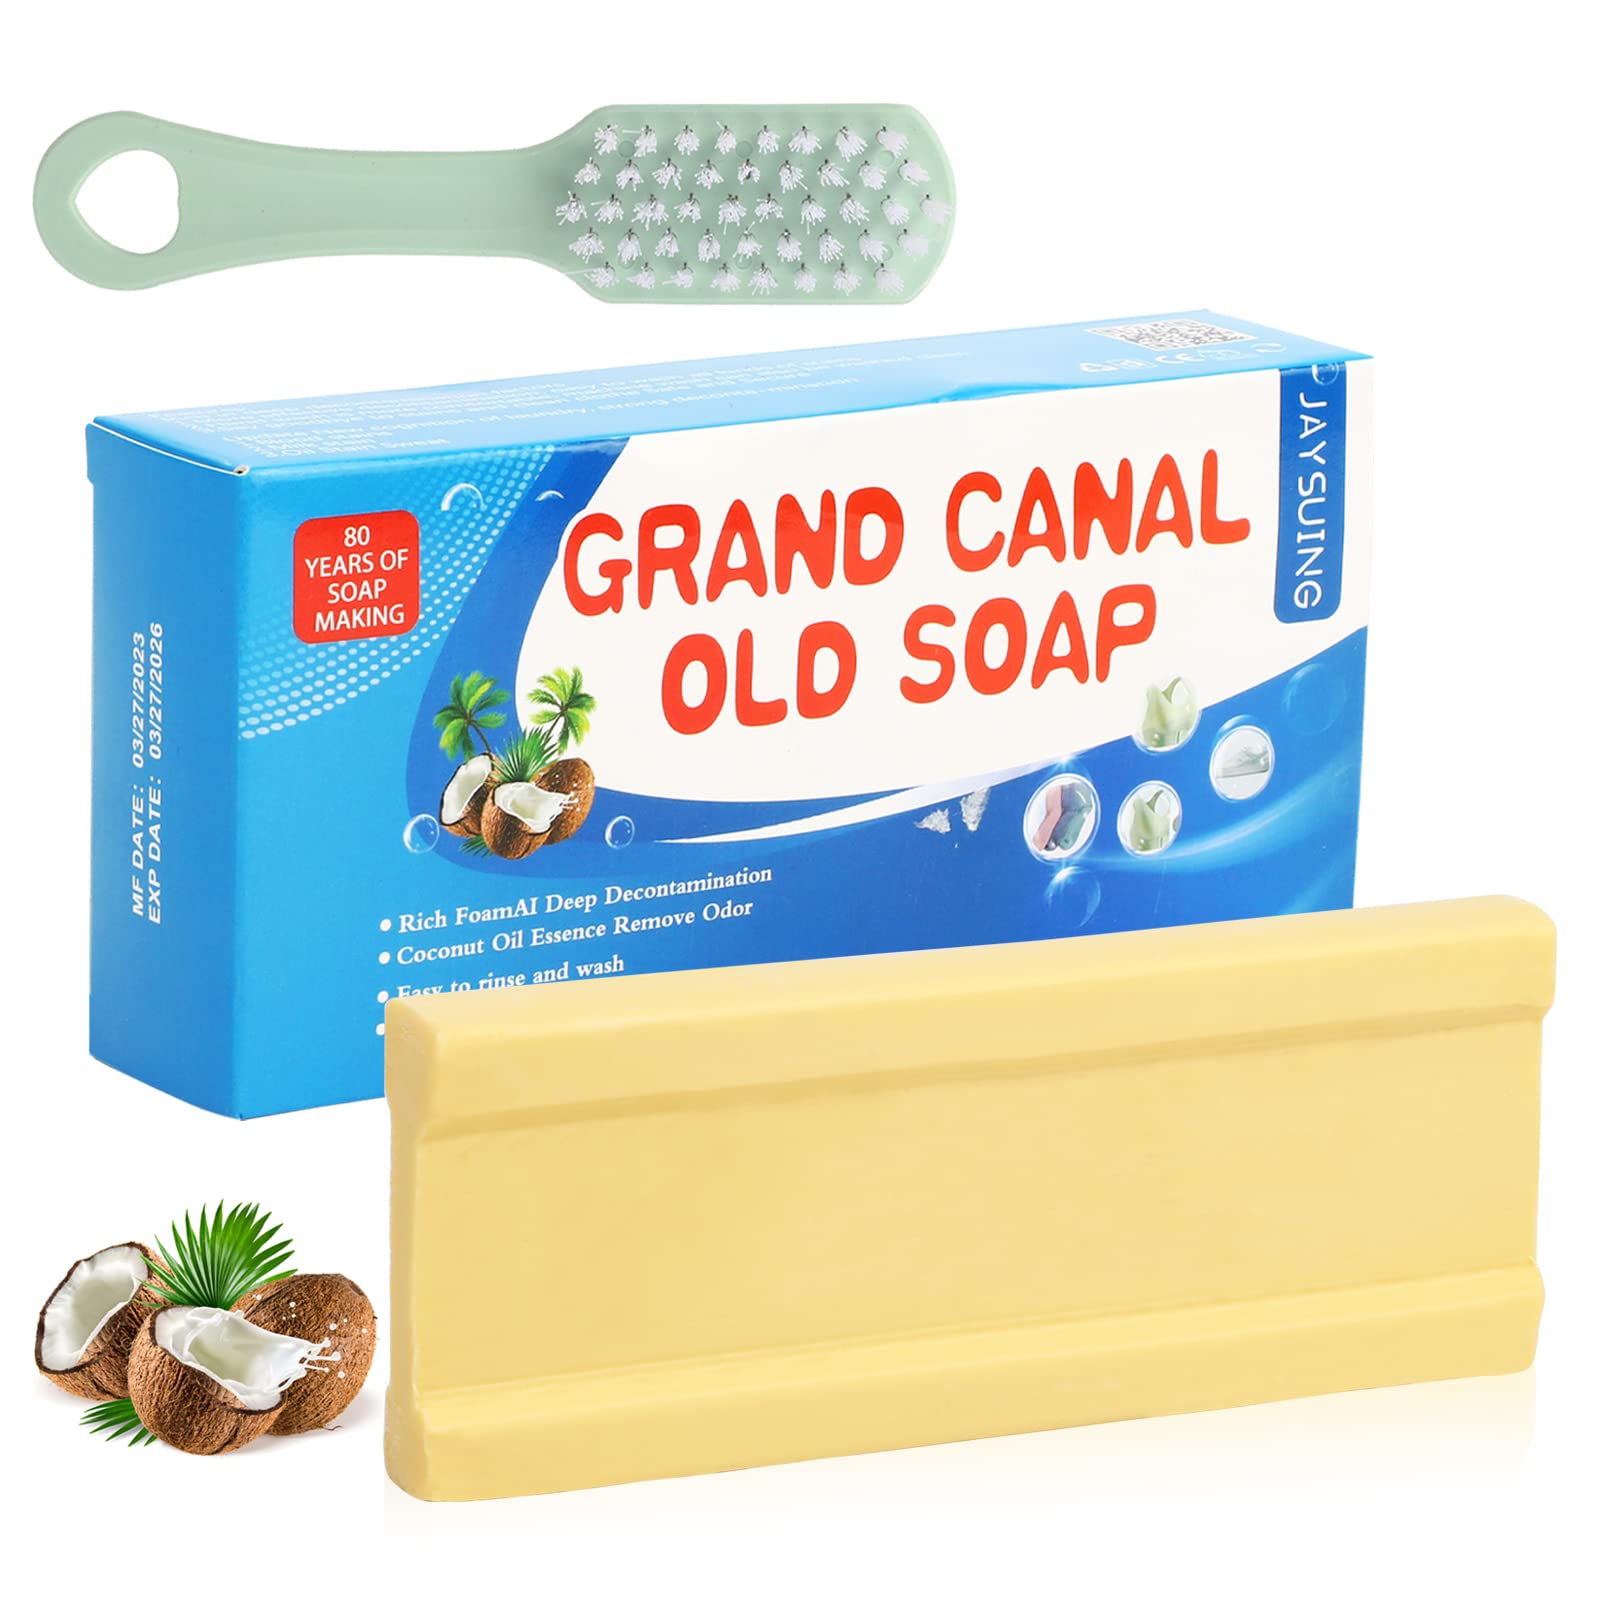 Grand Canal Old Soap & Brush Powerful Stain Remover Laundry Soap